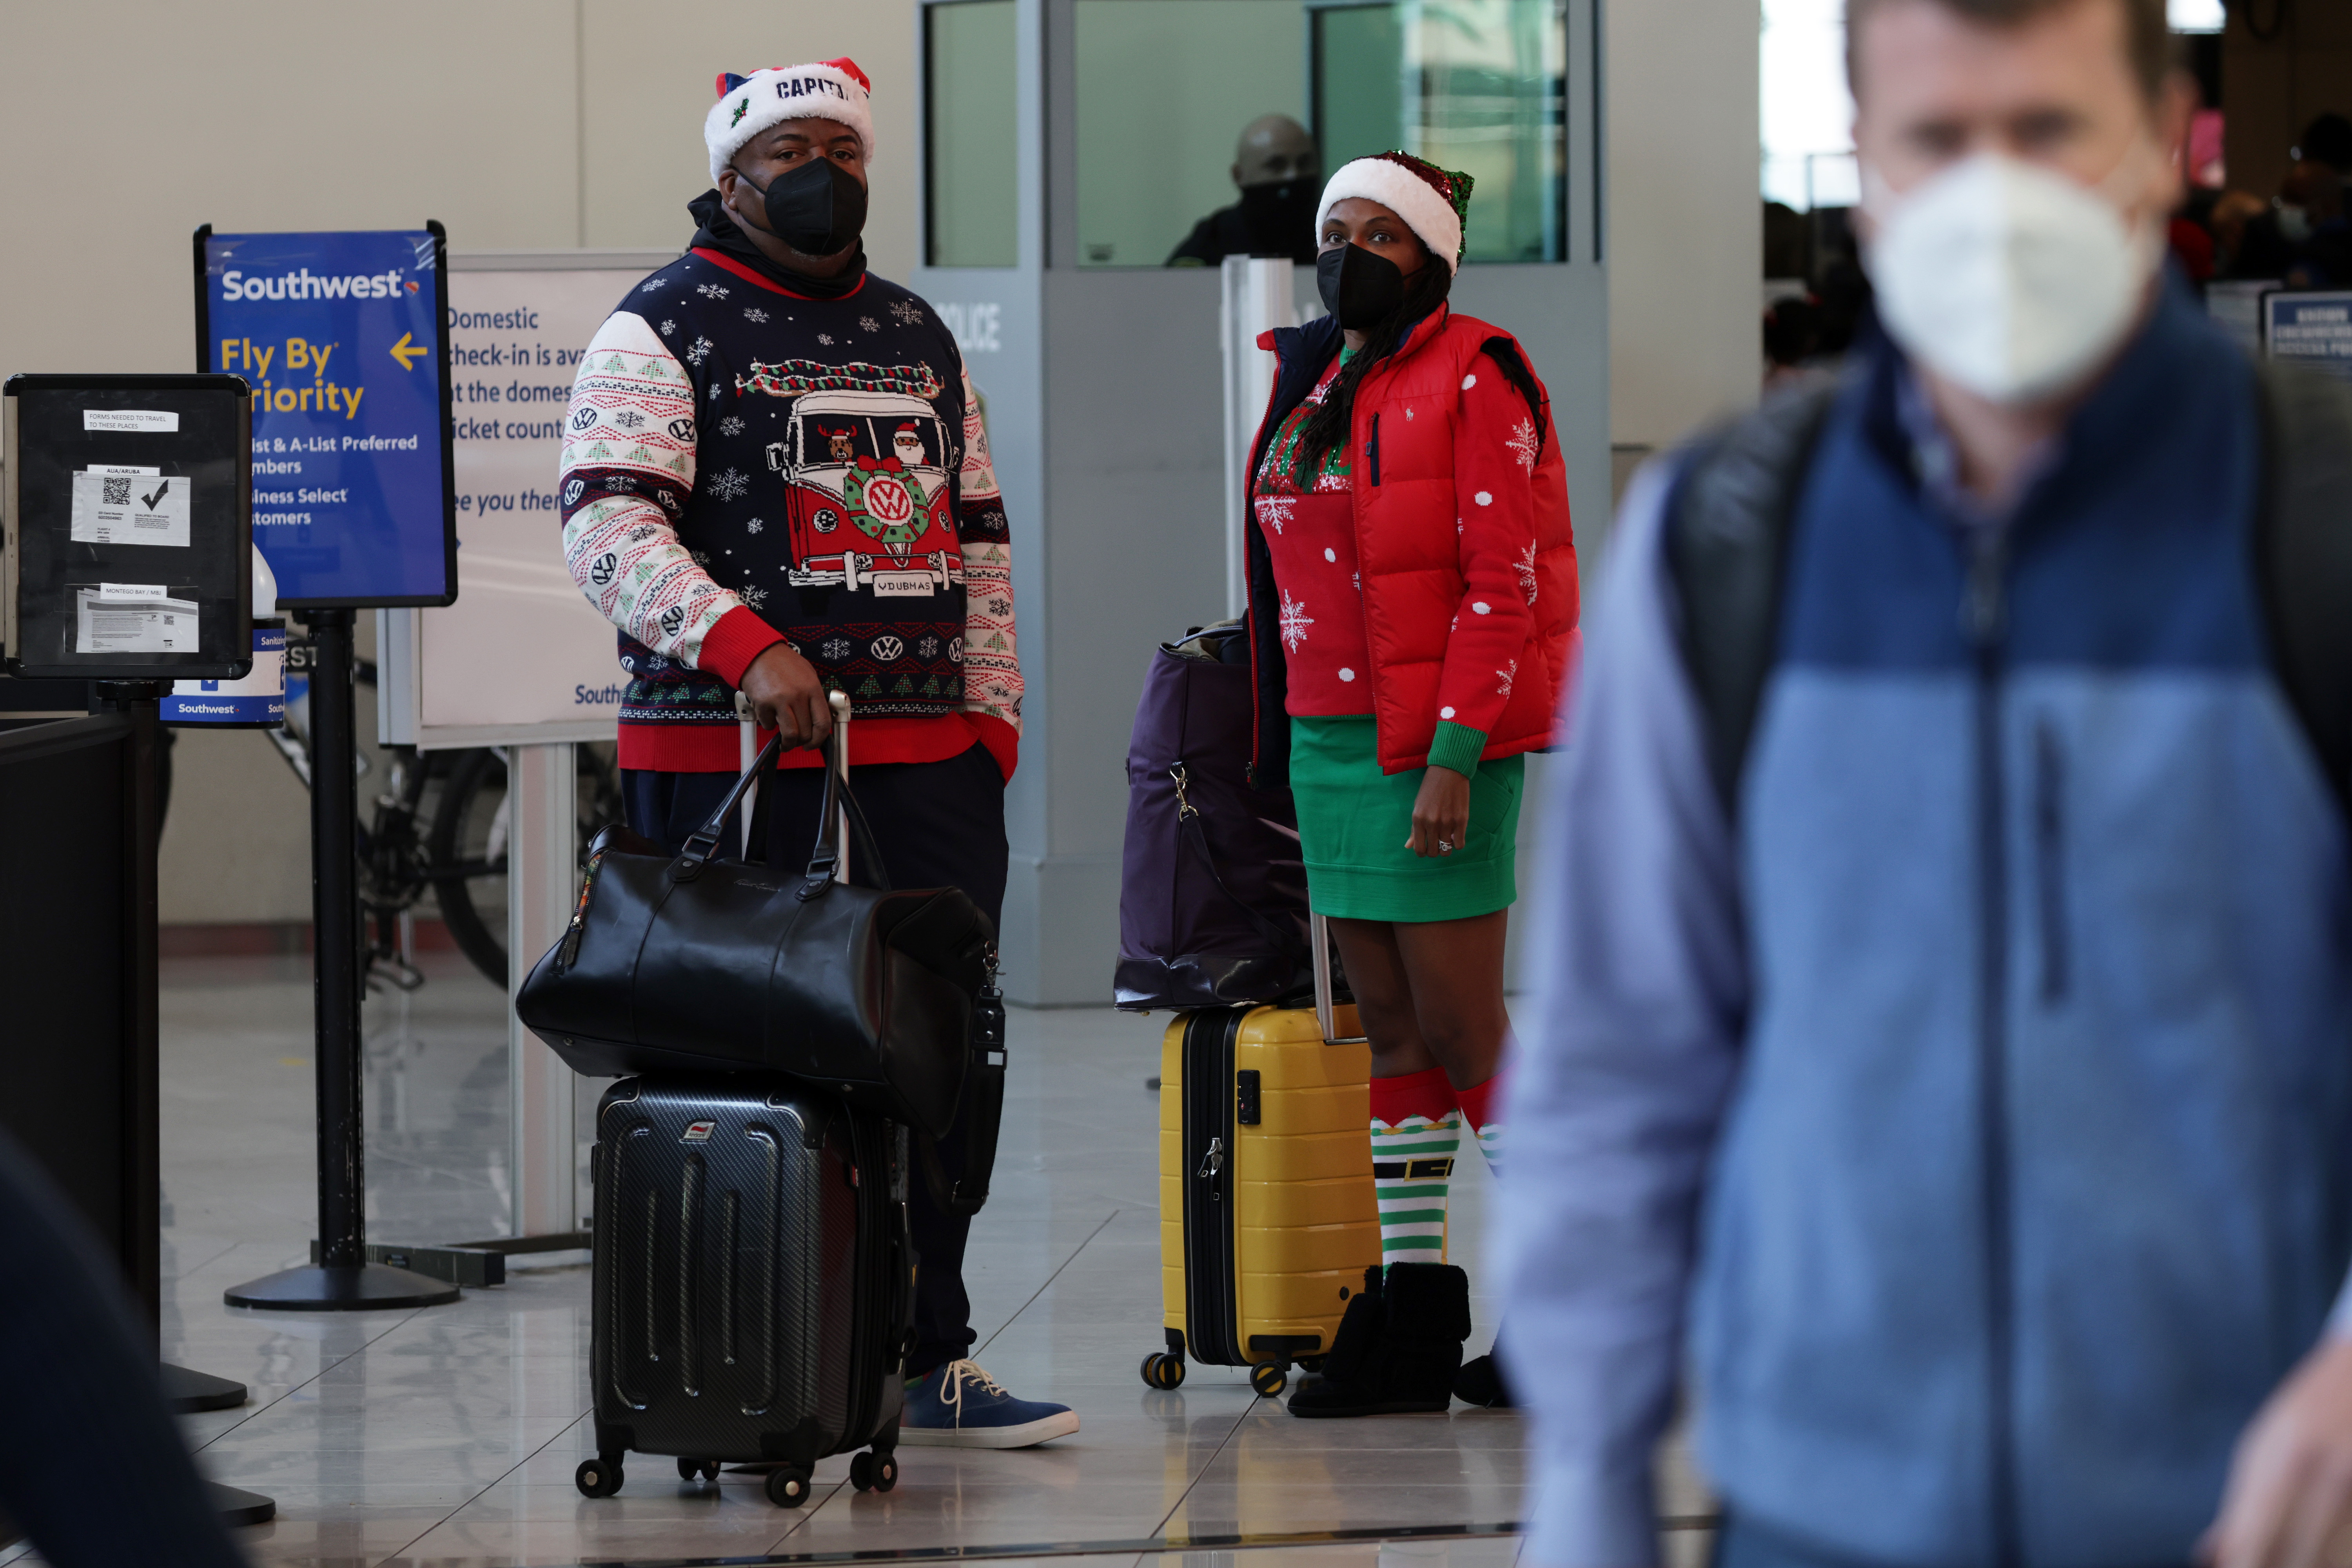 Passengers in Christmas outfits are seen in a terminal at Baltimore/Washington International Thurgood Marshall Airport (BWI) on December 22, 2021 in Baltimore, Maryland. AAA predicted more than 109 million Americans will travel 50 miles or more over Christmas and New Year holidays, a spike of 27.7% over last year. 